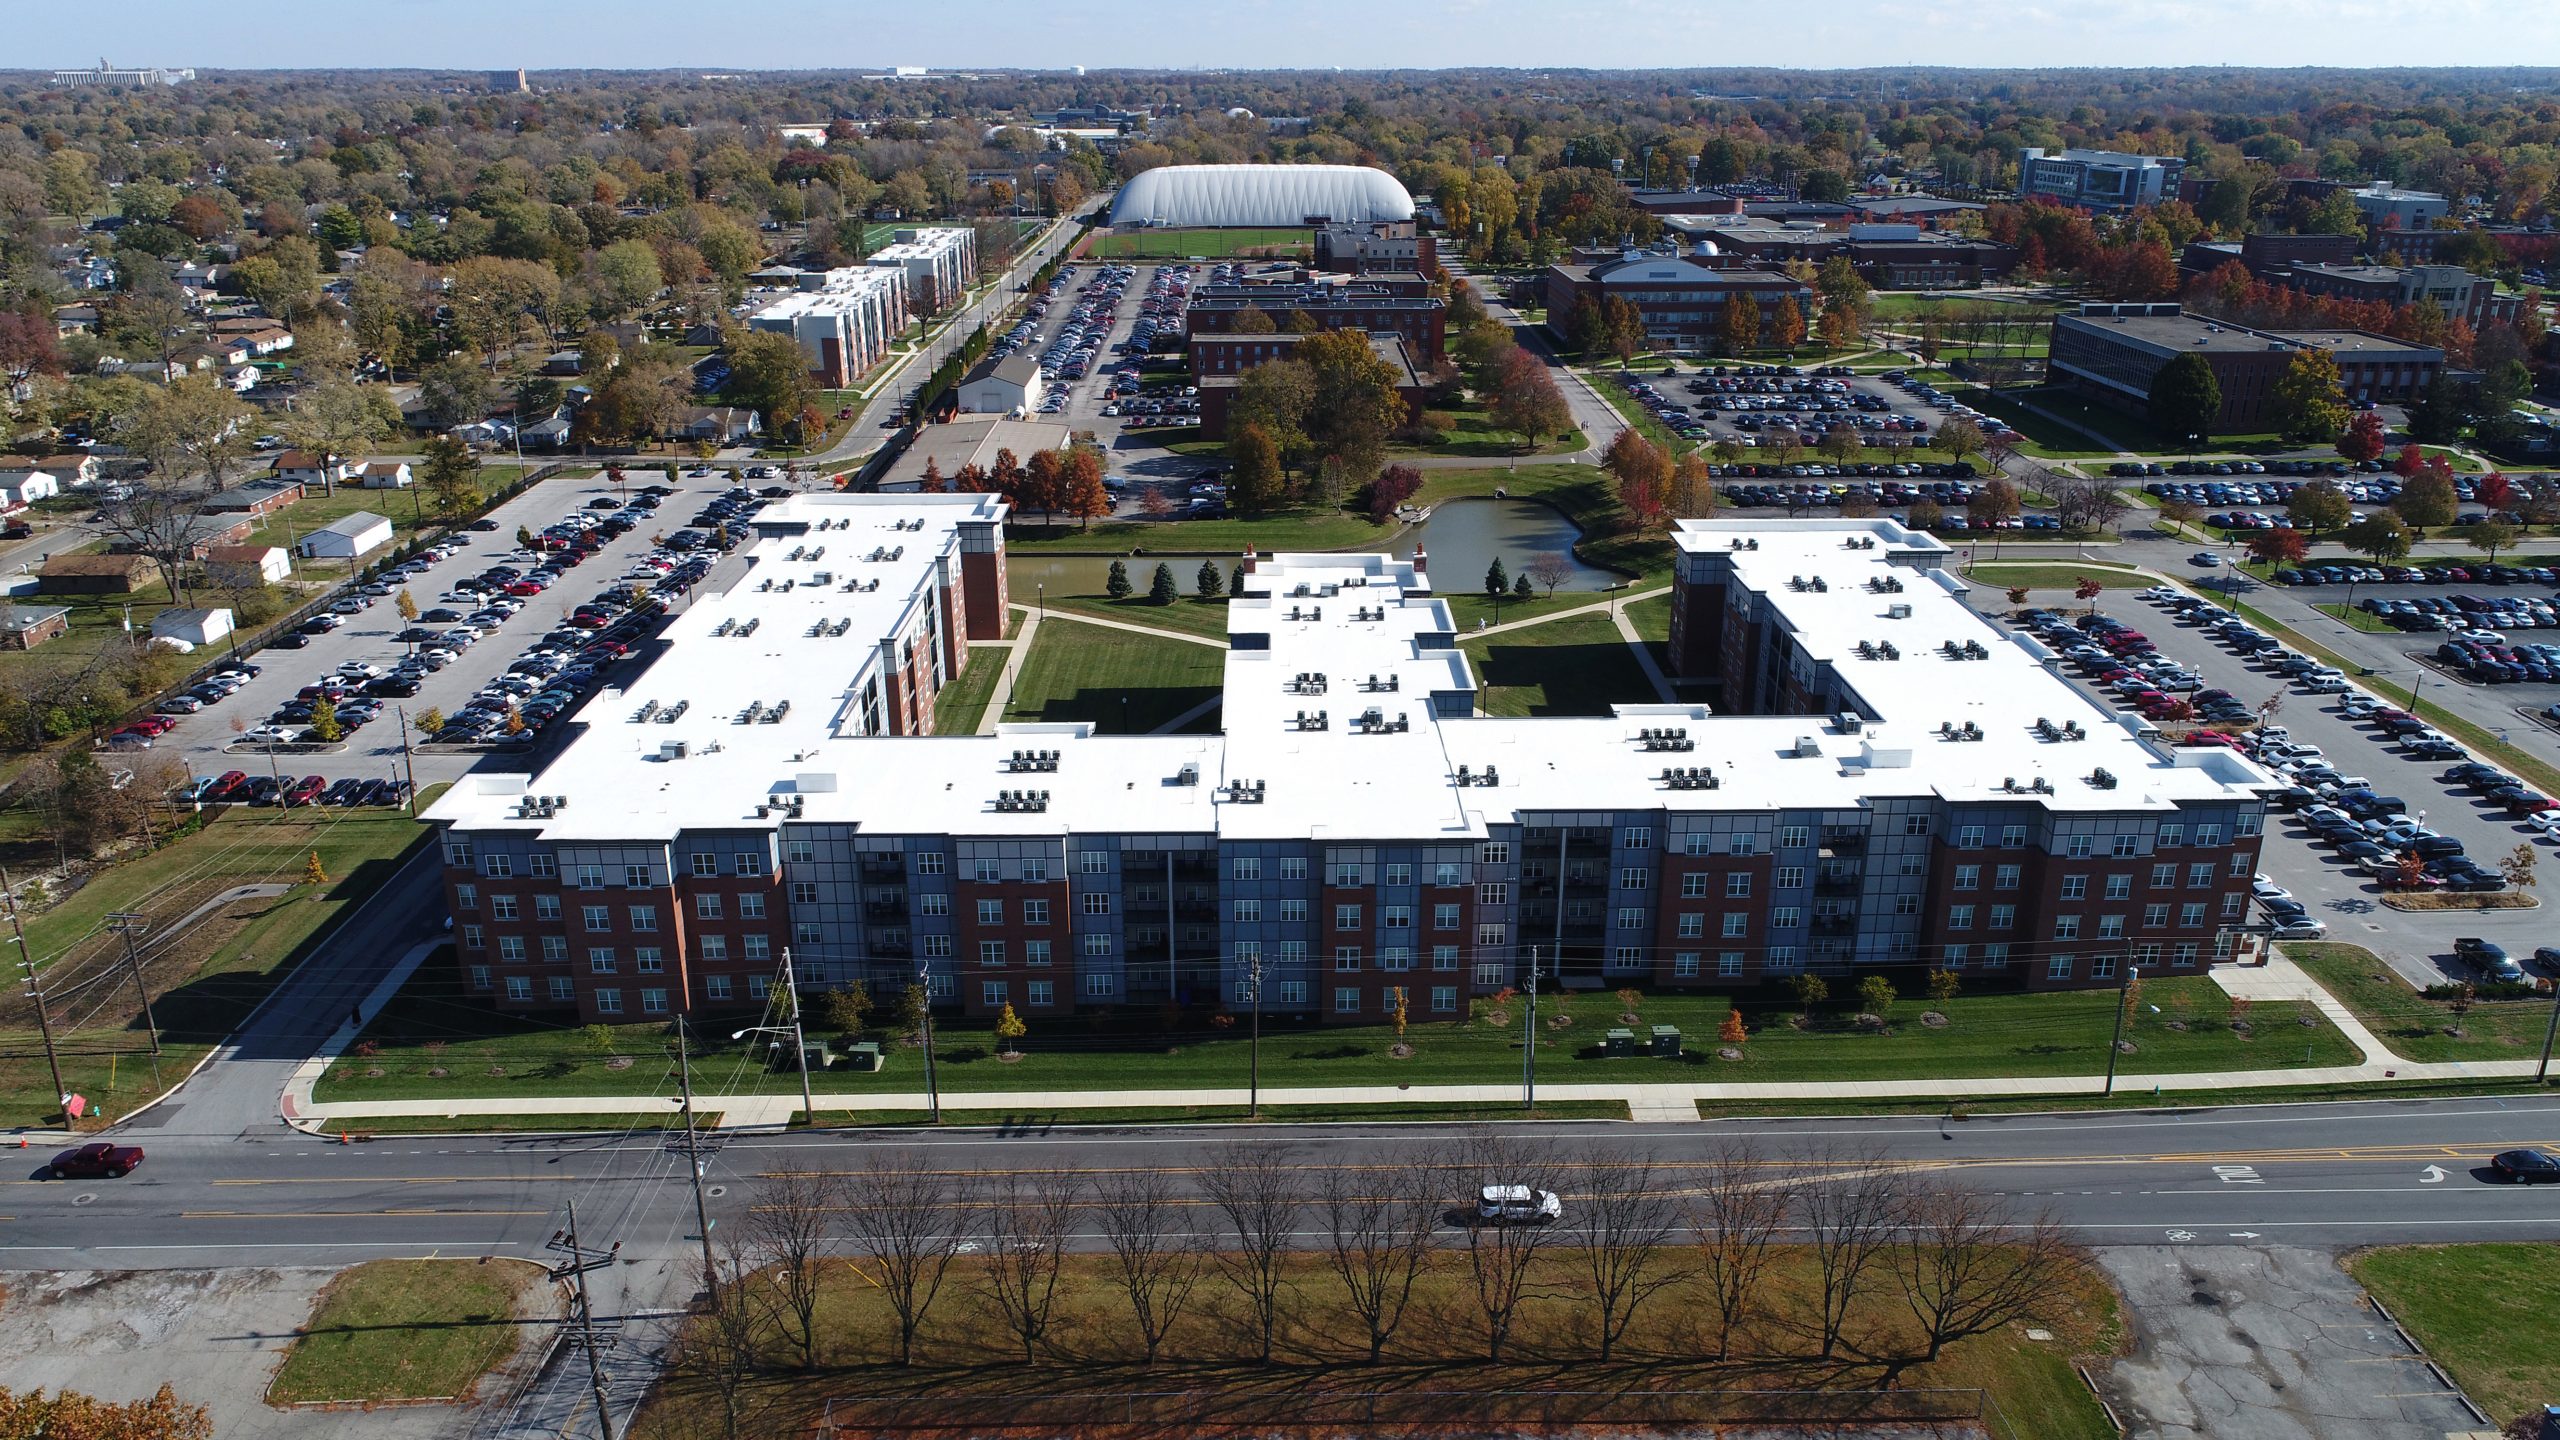 university of indiana commercial roofing project by ce reeve roofing in Indiana